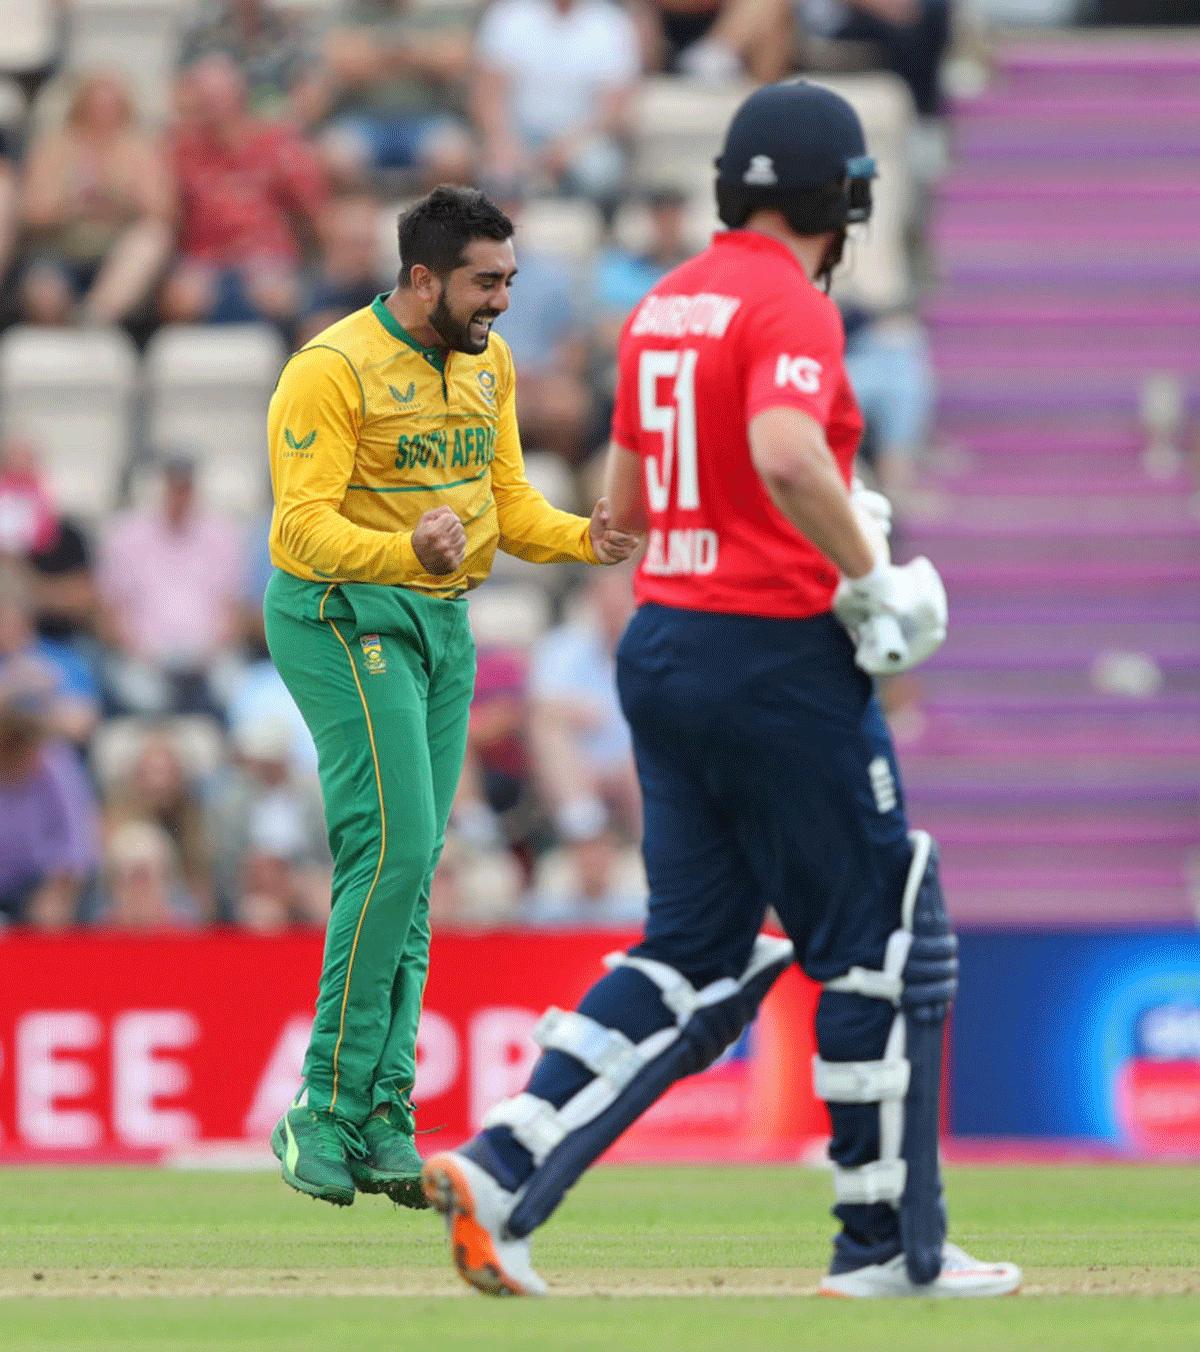 South Africa's Tabraiz Shamsi celebrates on picking a wicket during the 3rd T20I against England at The Ageas Bowl in Southampton on Sunday